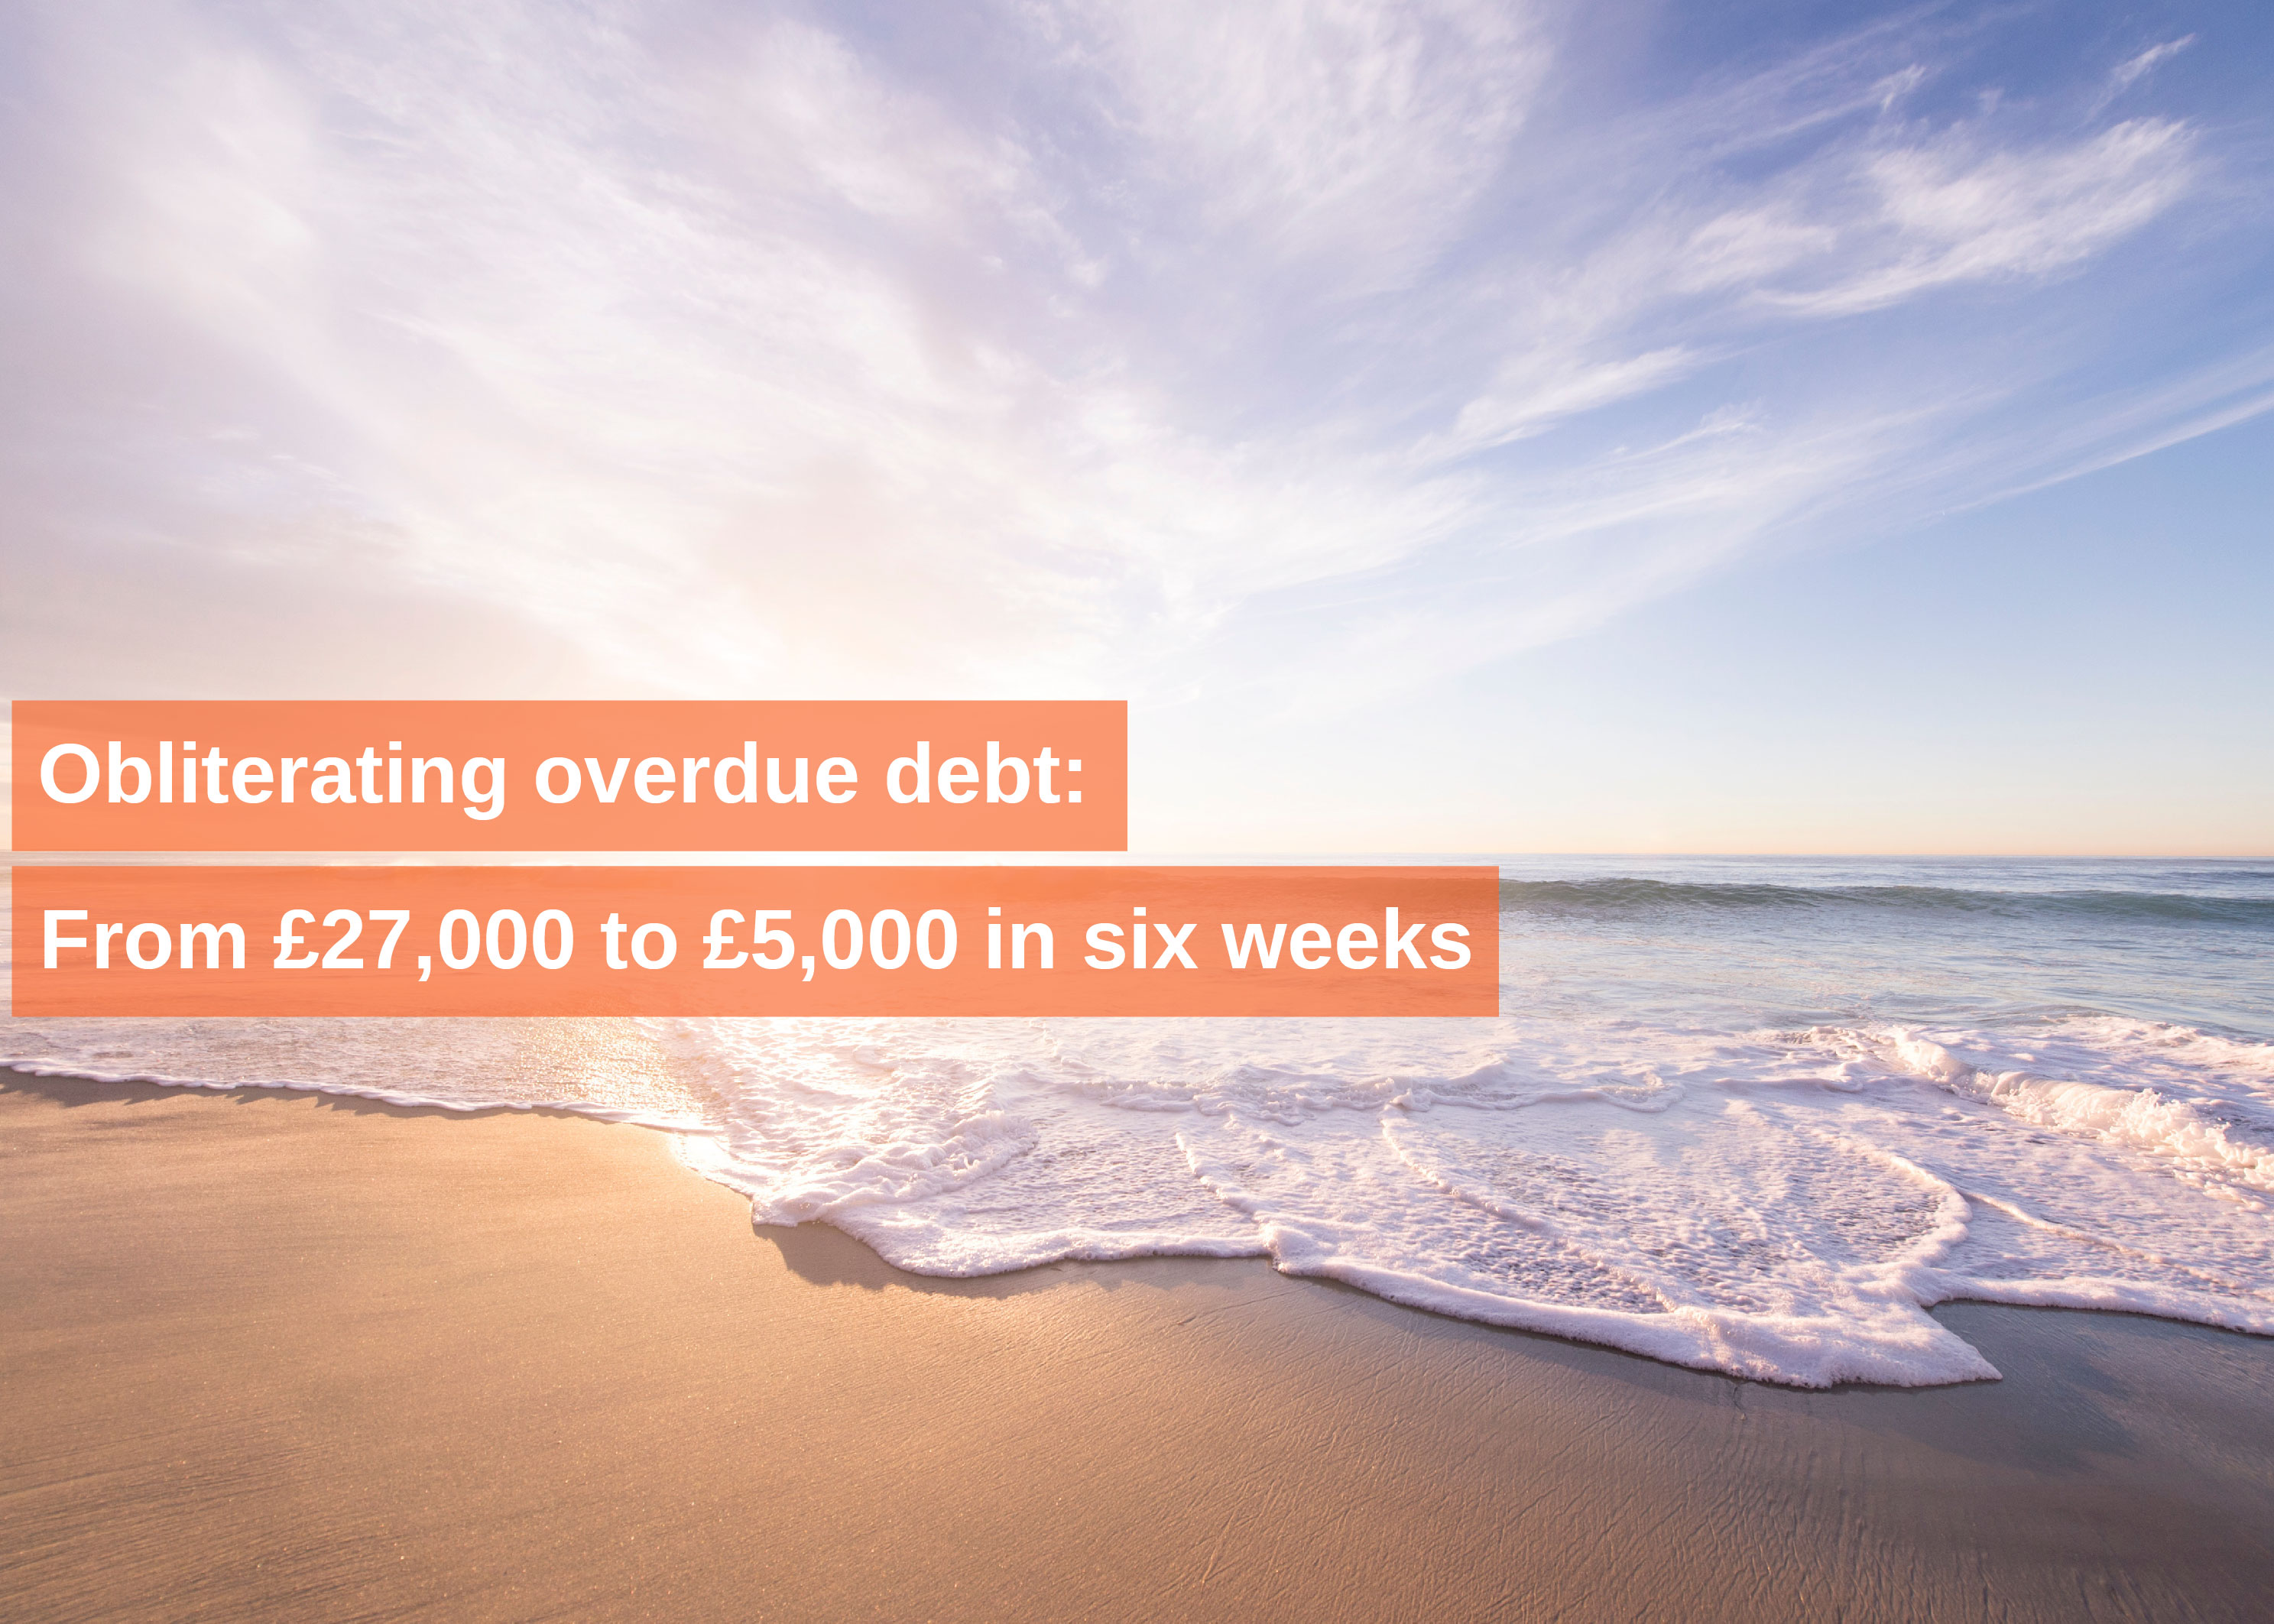 Obliterating overdue debt: From £27,000 to £5,000 in six weeks